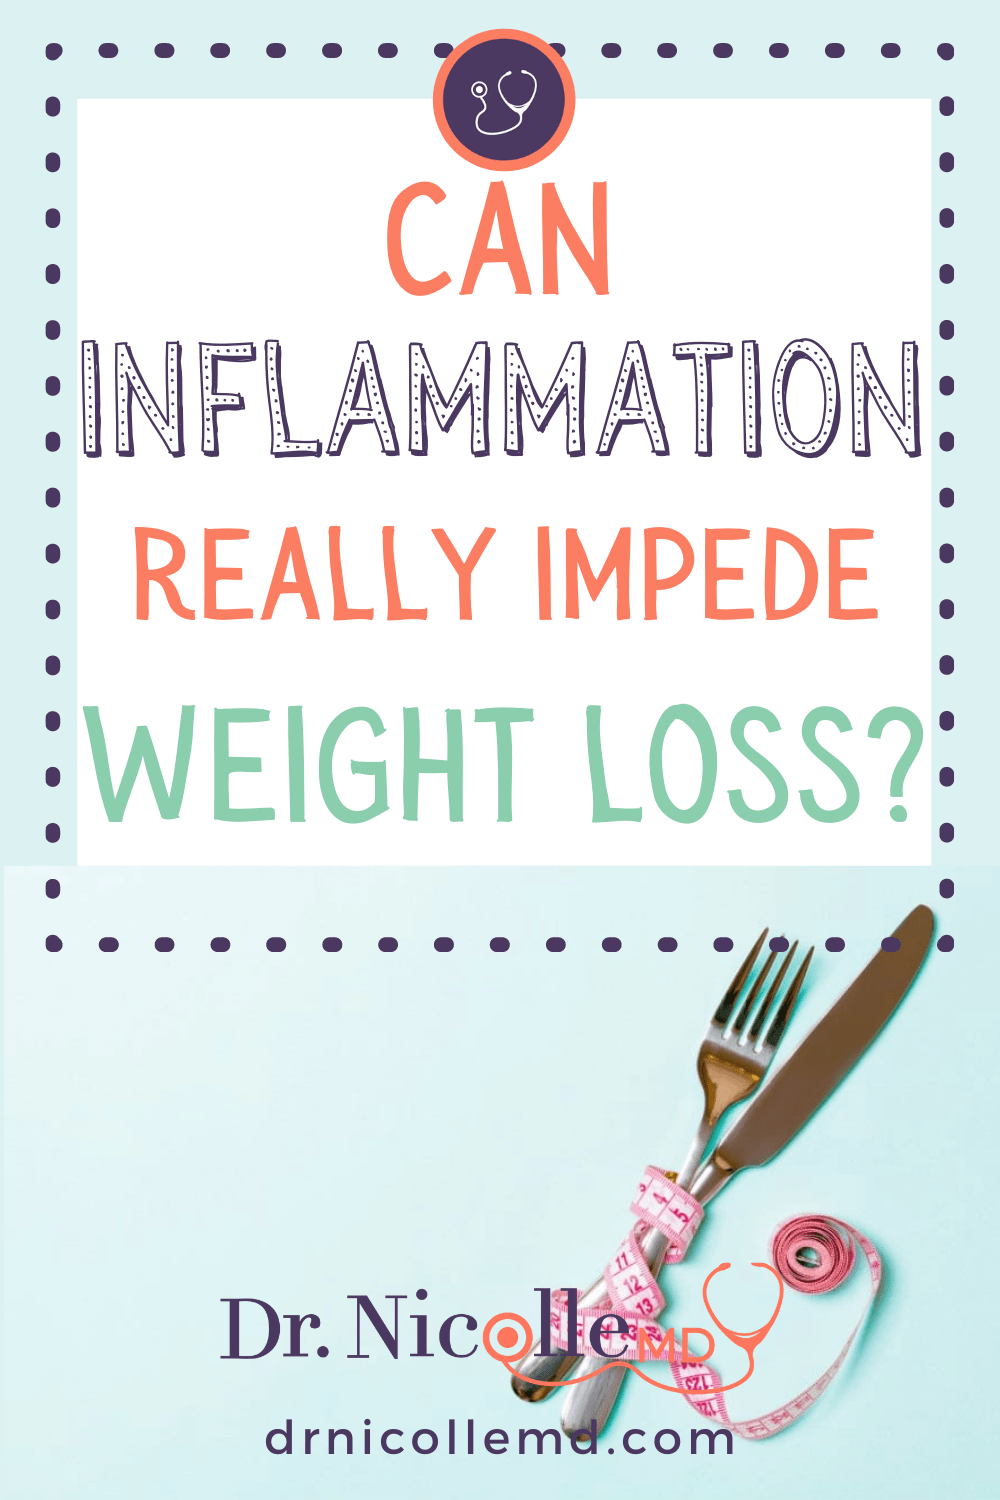 Can Inflammation Really Impede Weight Loss?